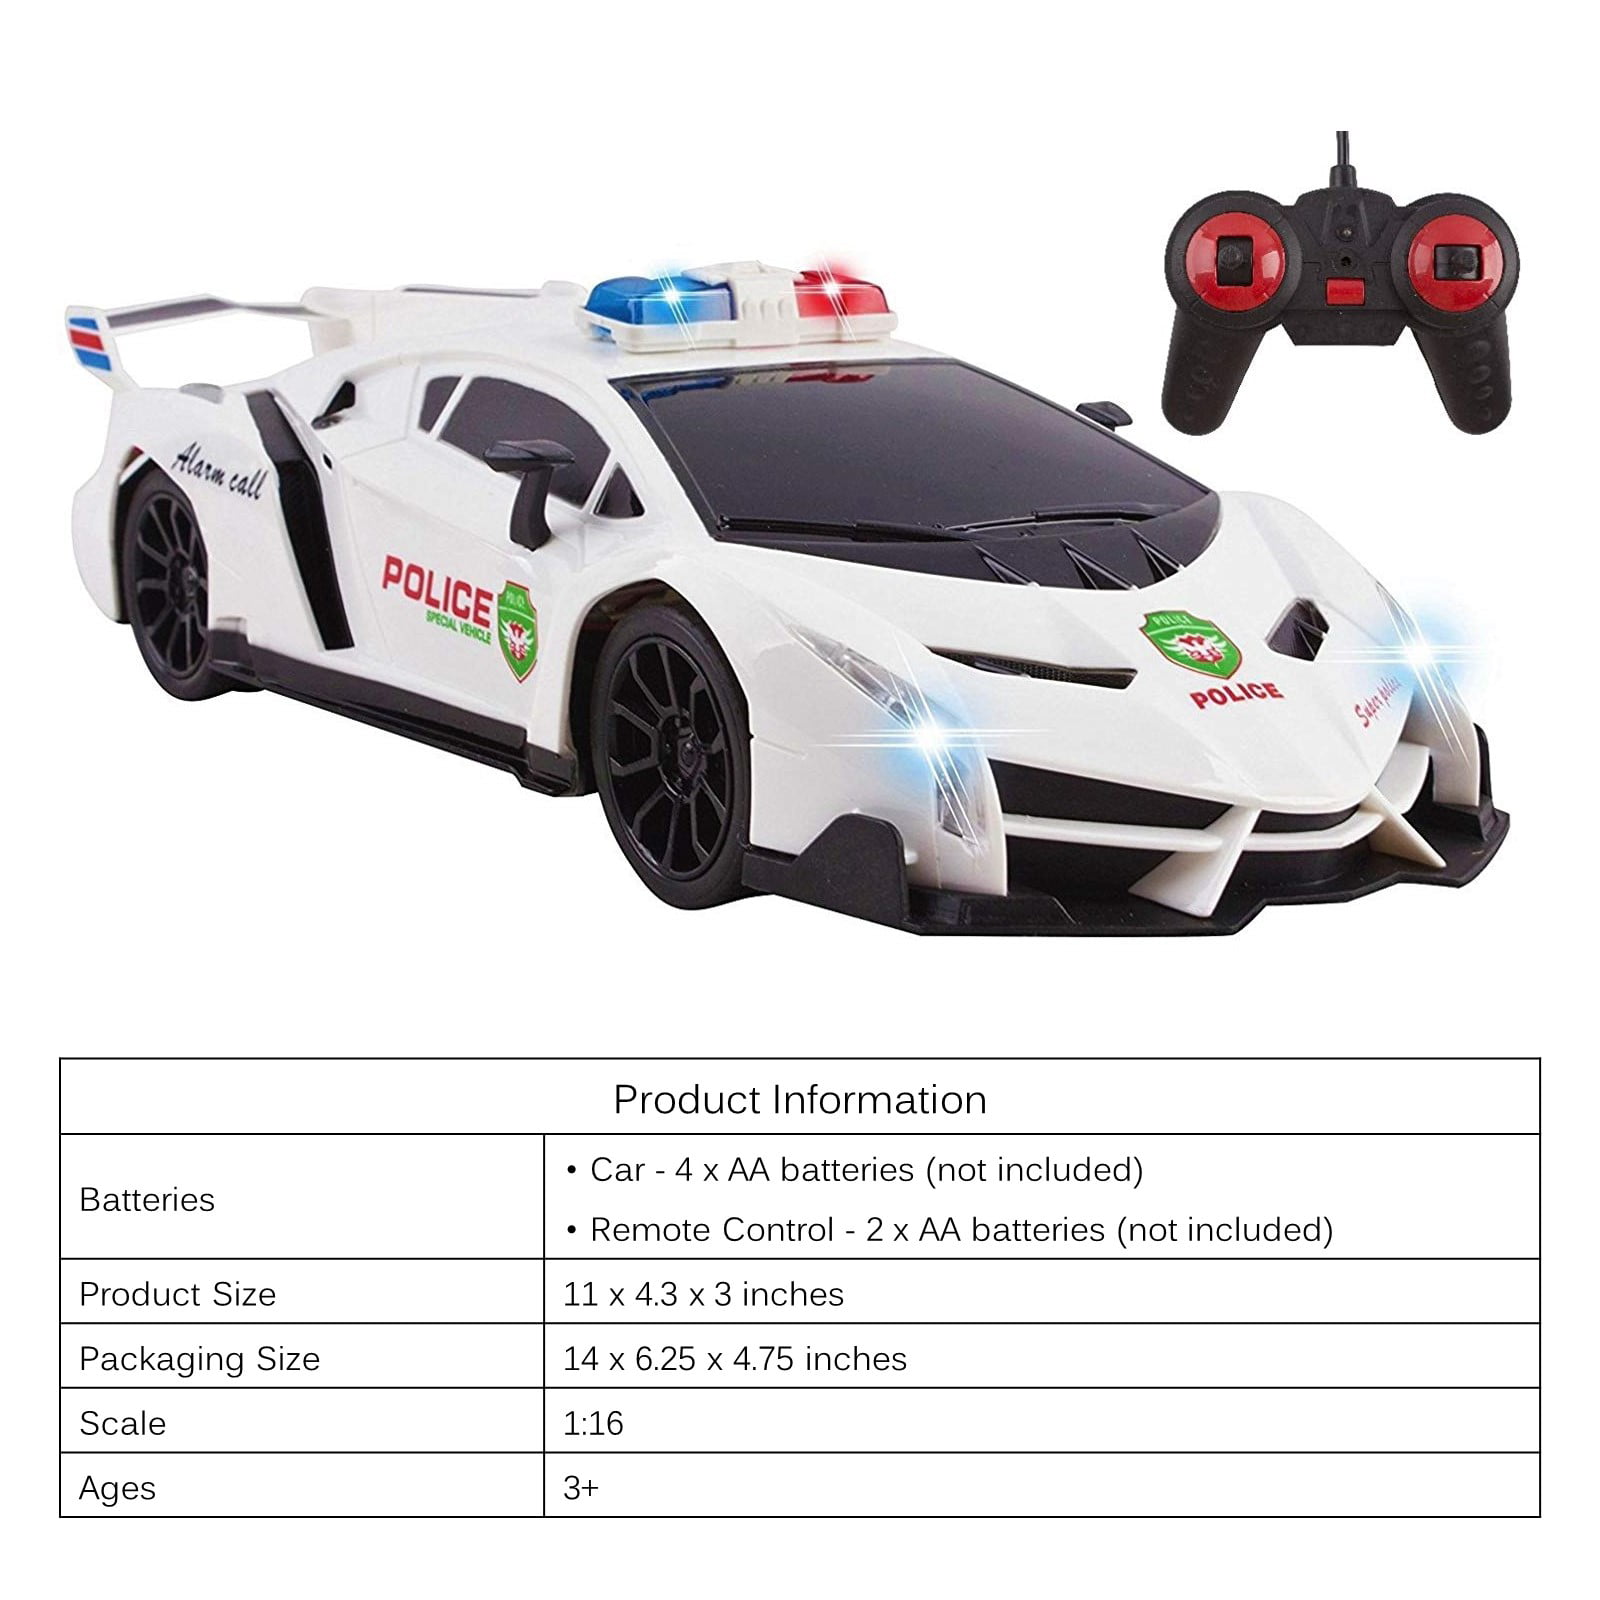 Police Racing Car Police Vehicle 1:16 LED Lights Remote-controlled